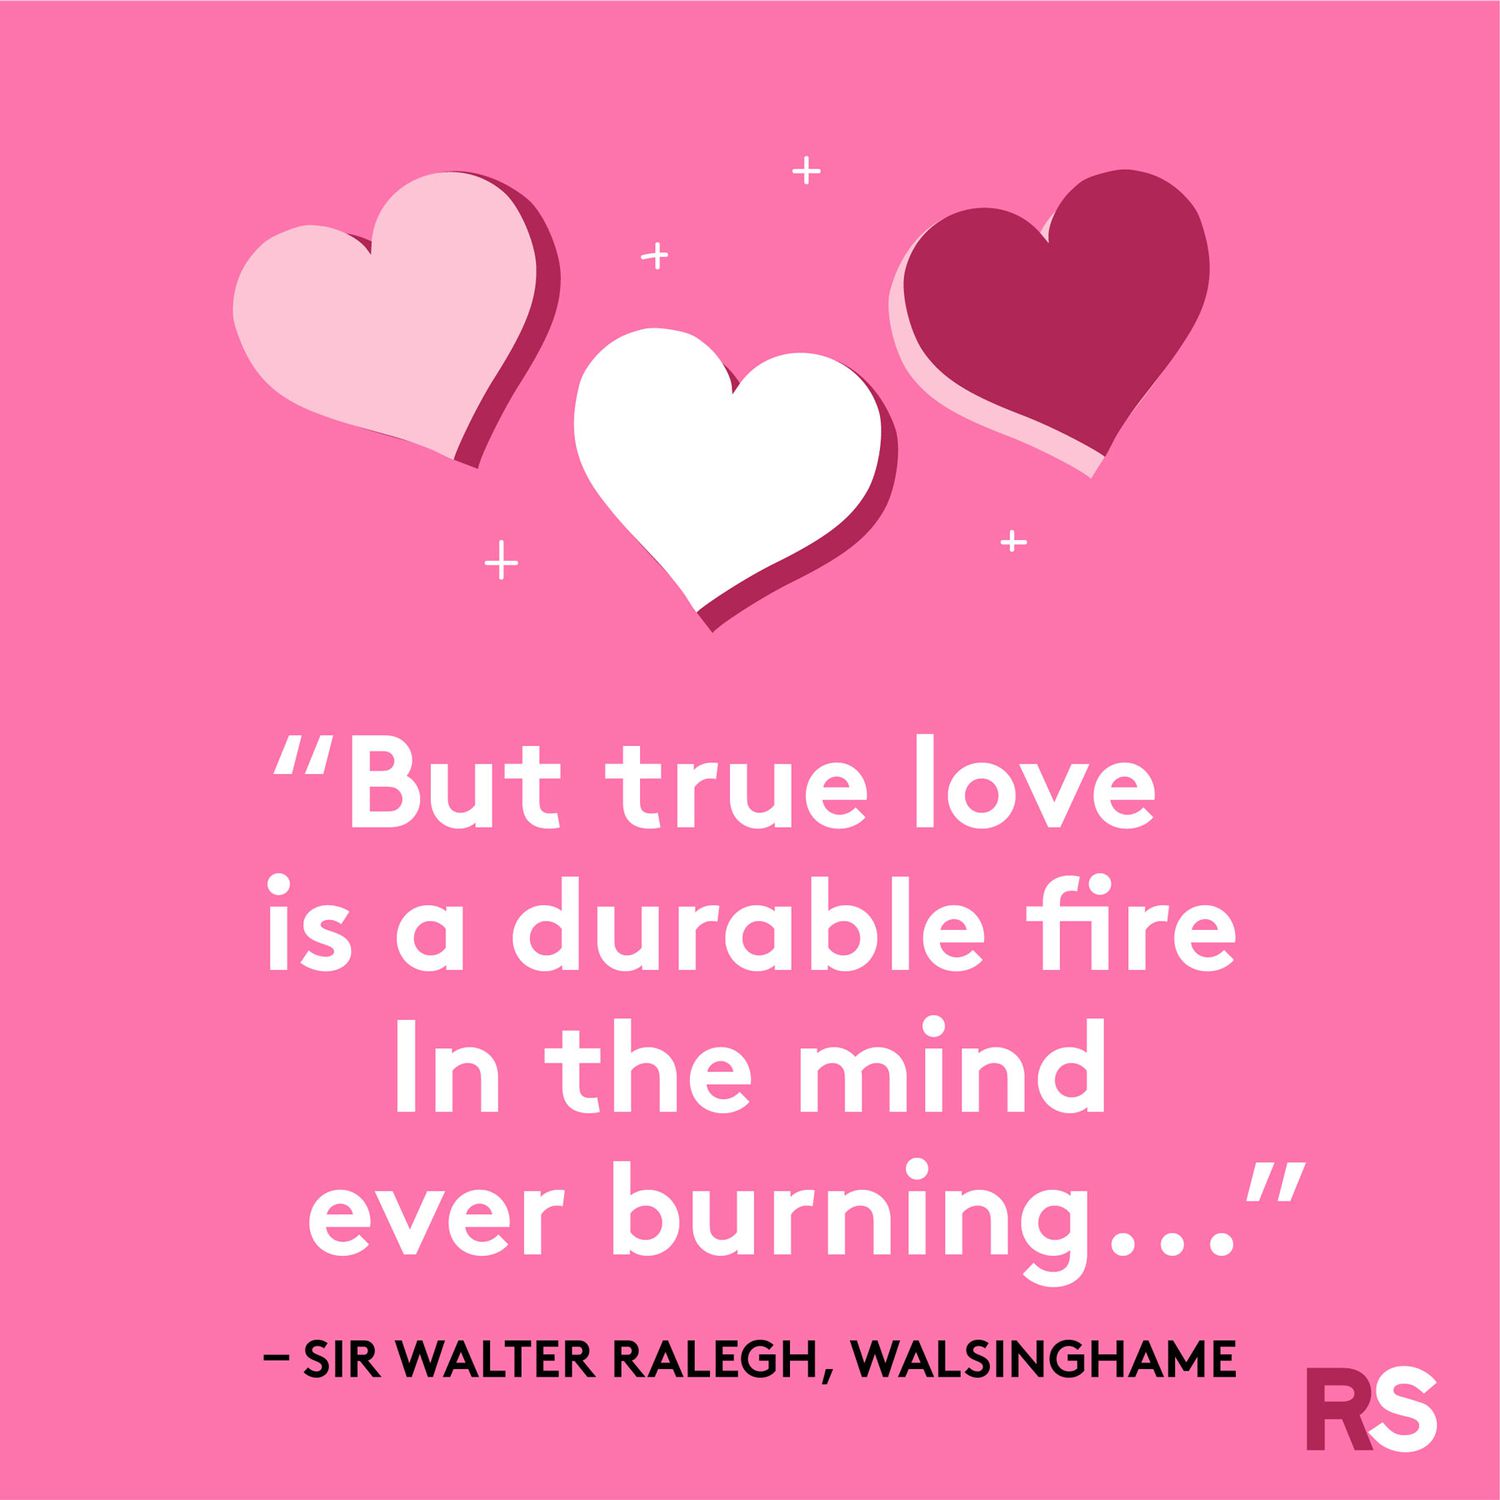 Love quotes, quotes about love - Sir Walter Ralegh, Walsinghame